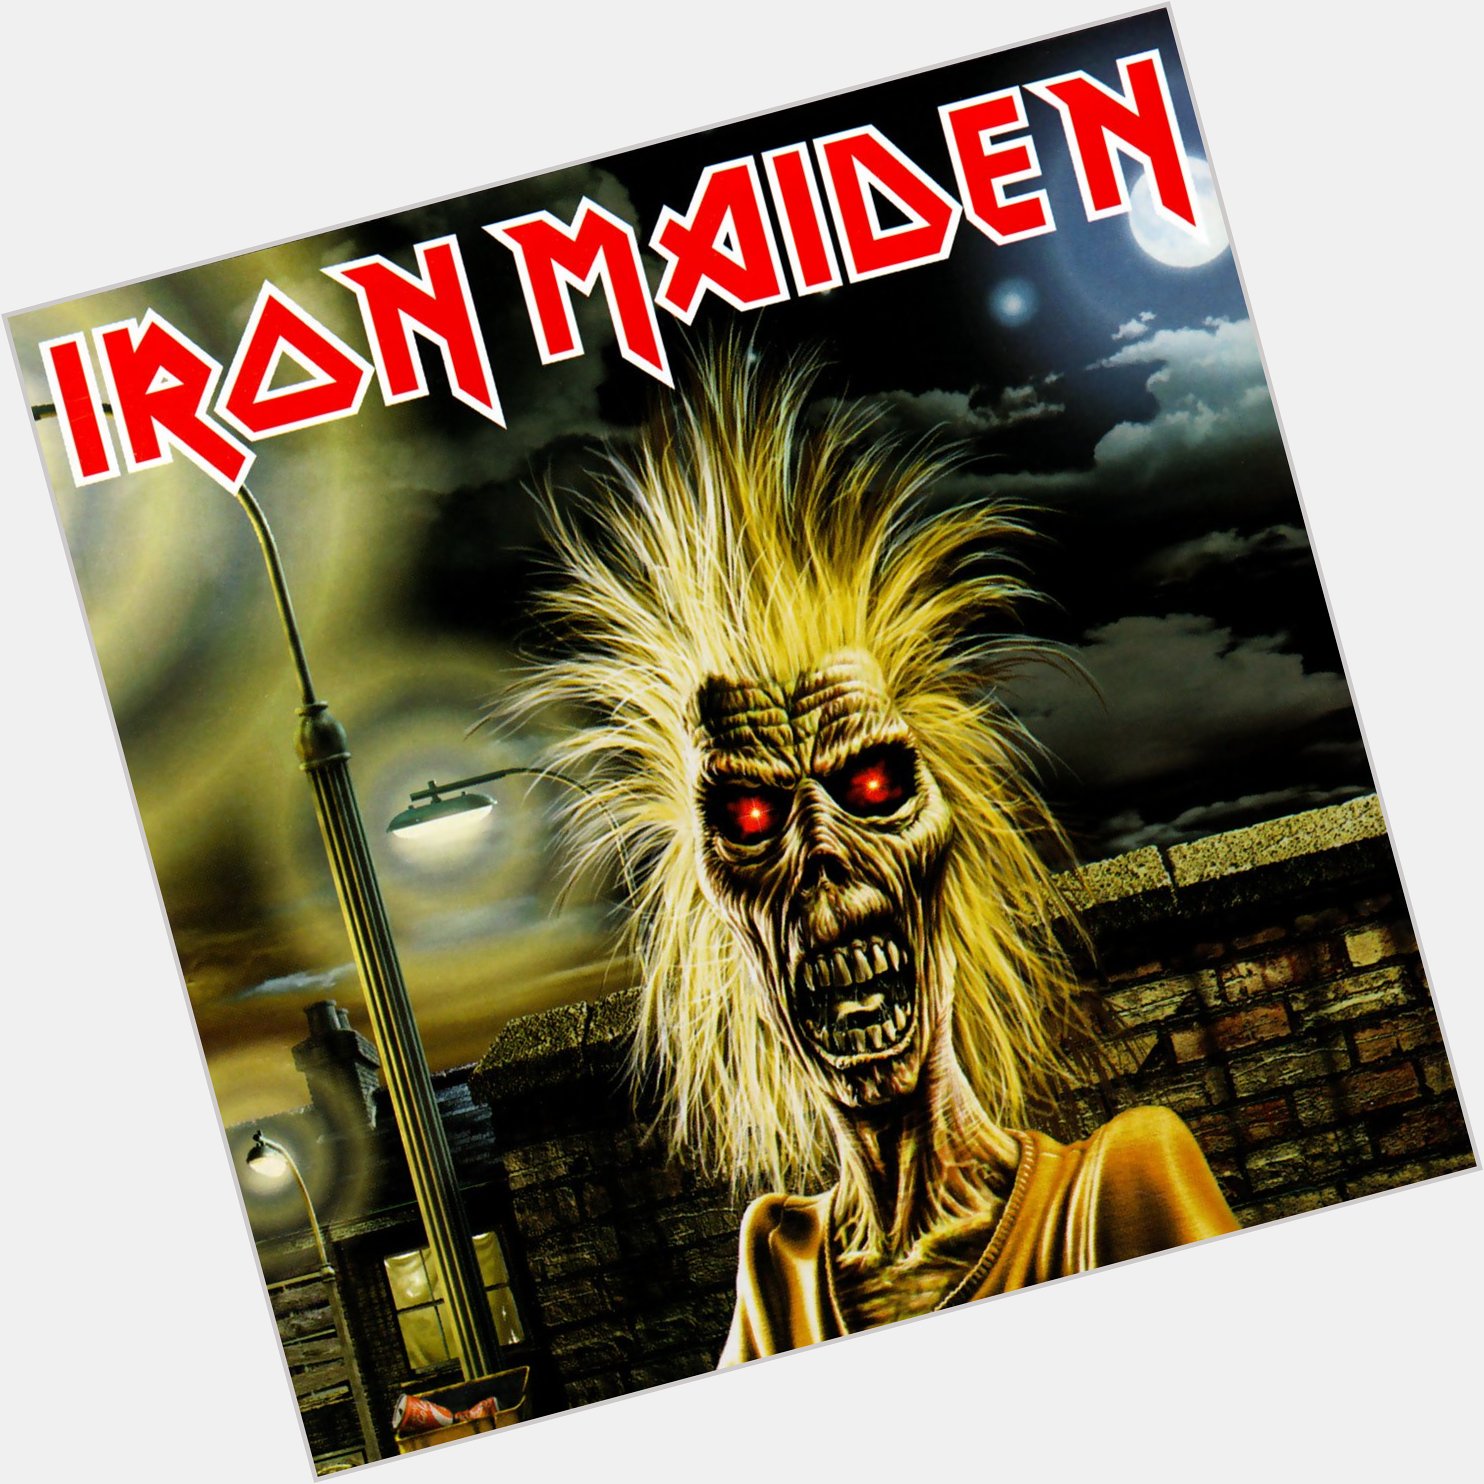  Prowler
from Iron Maiden
by Iron Maiden

Happy Birthday, Clive Burr 